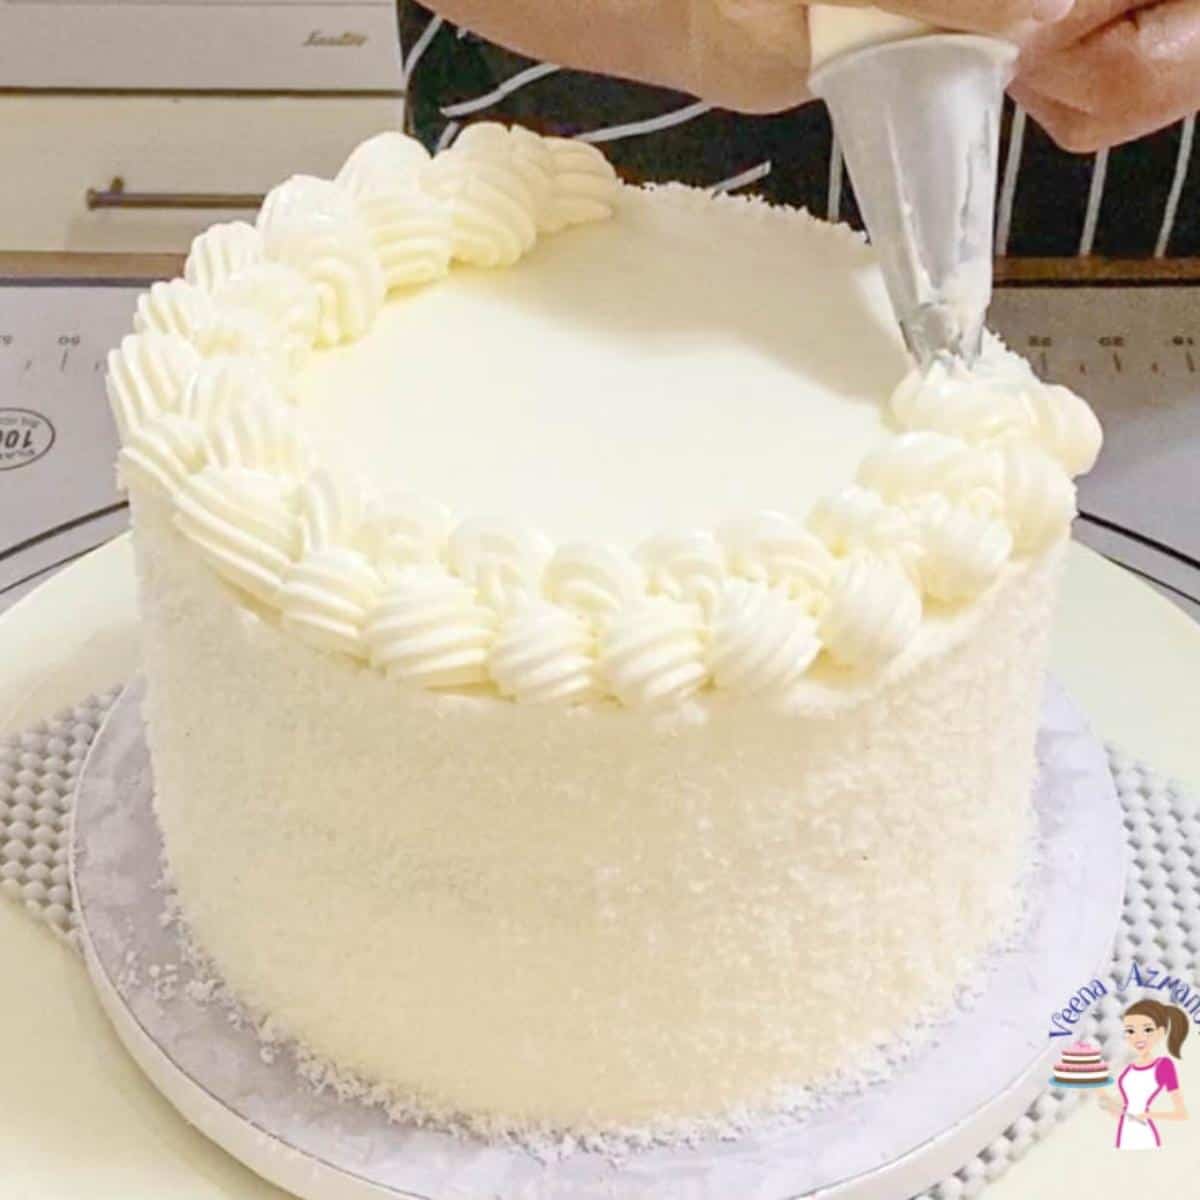 Piping frosting on a coconut cake.